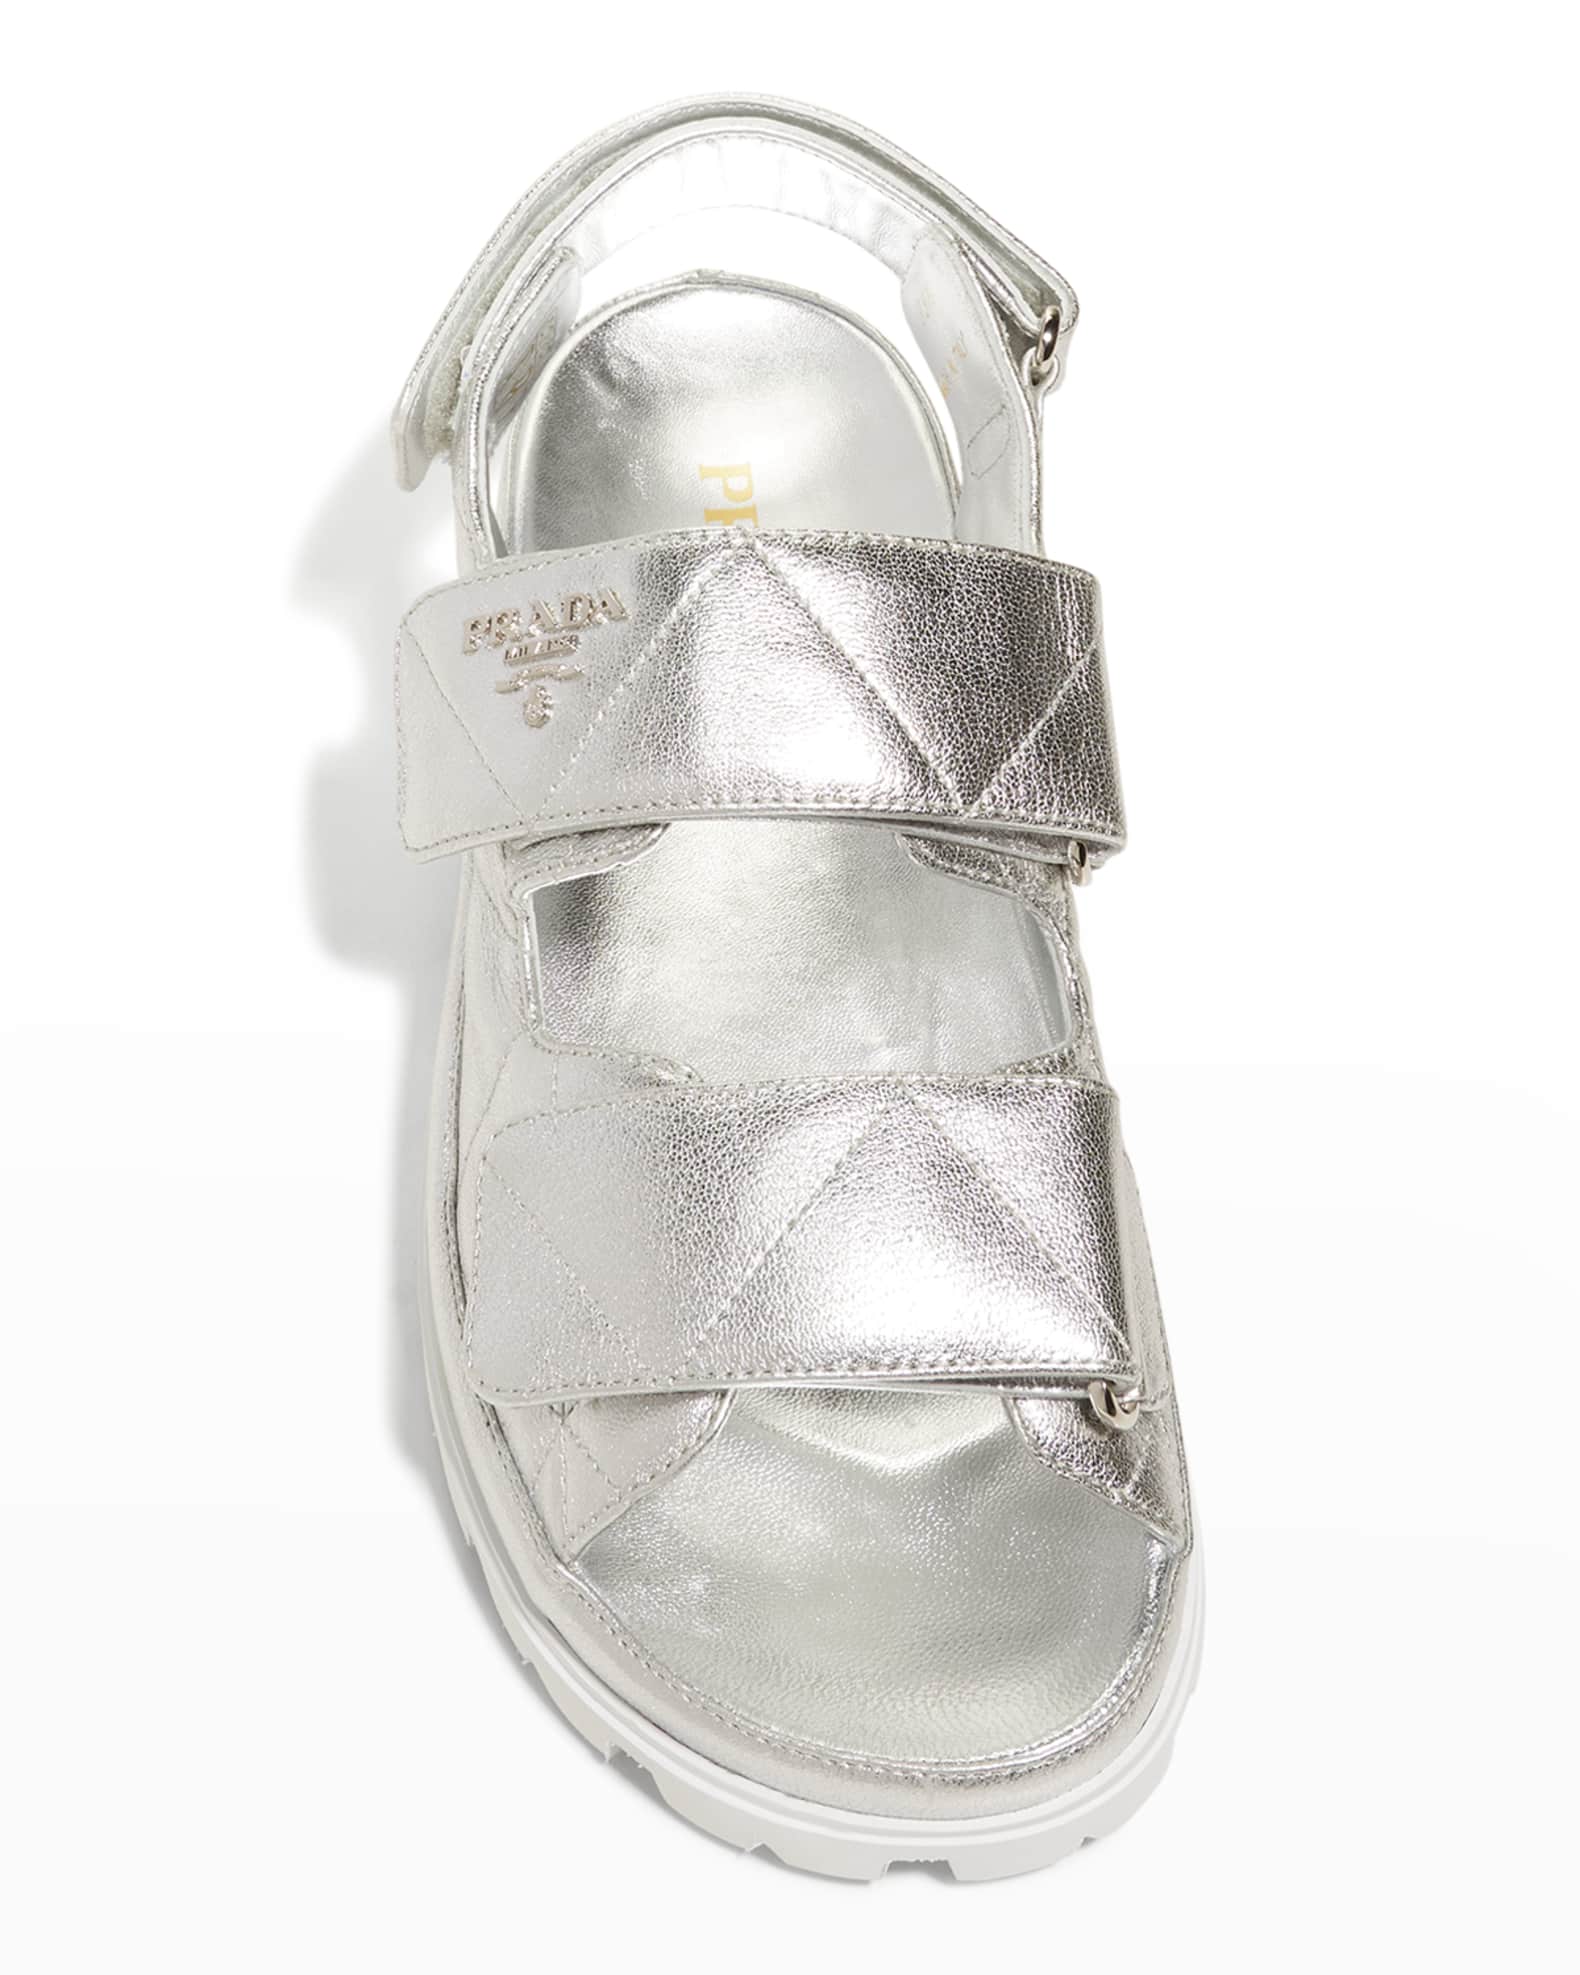 Prada Quilted Leather Slingback Sporty Sandals | Neiman Marcus